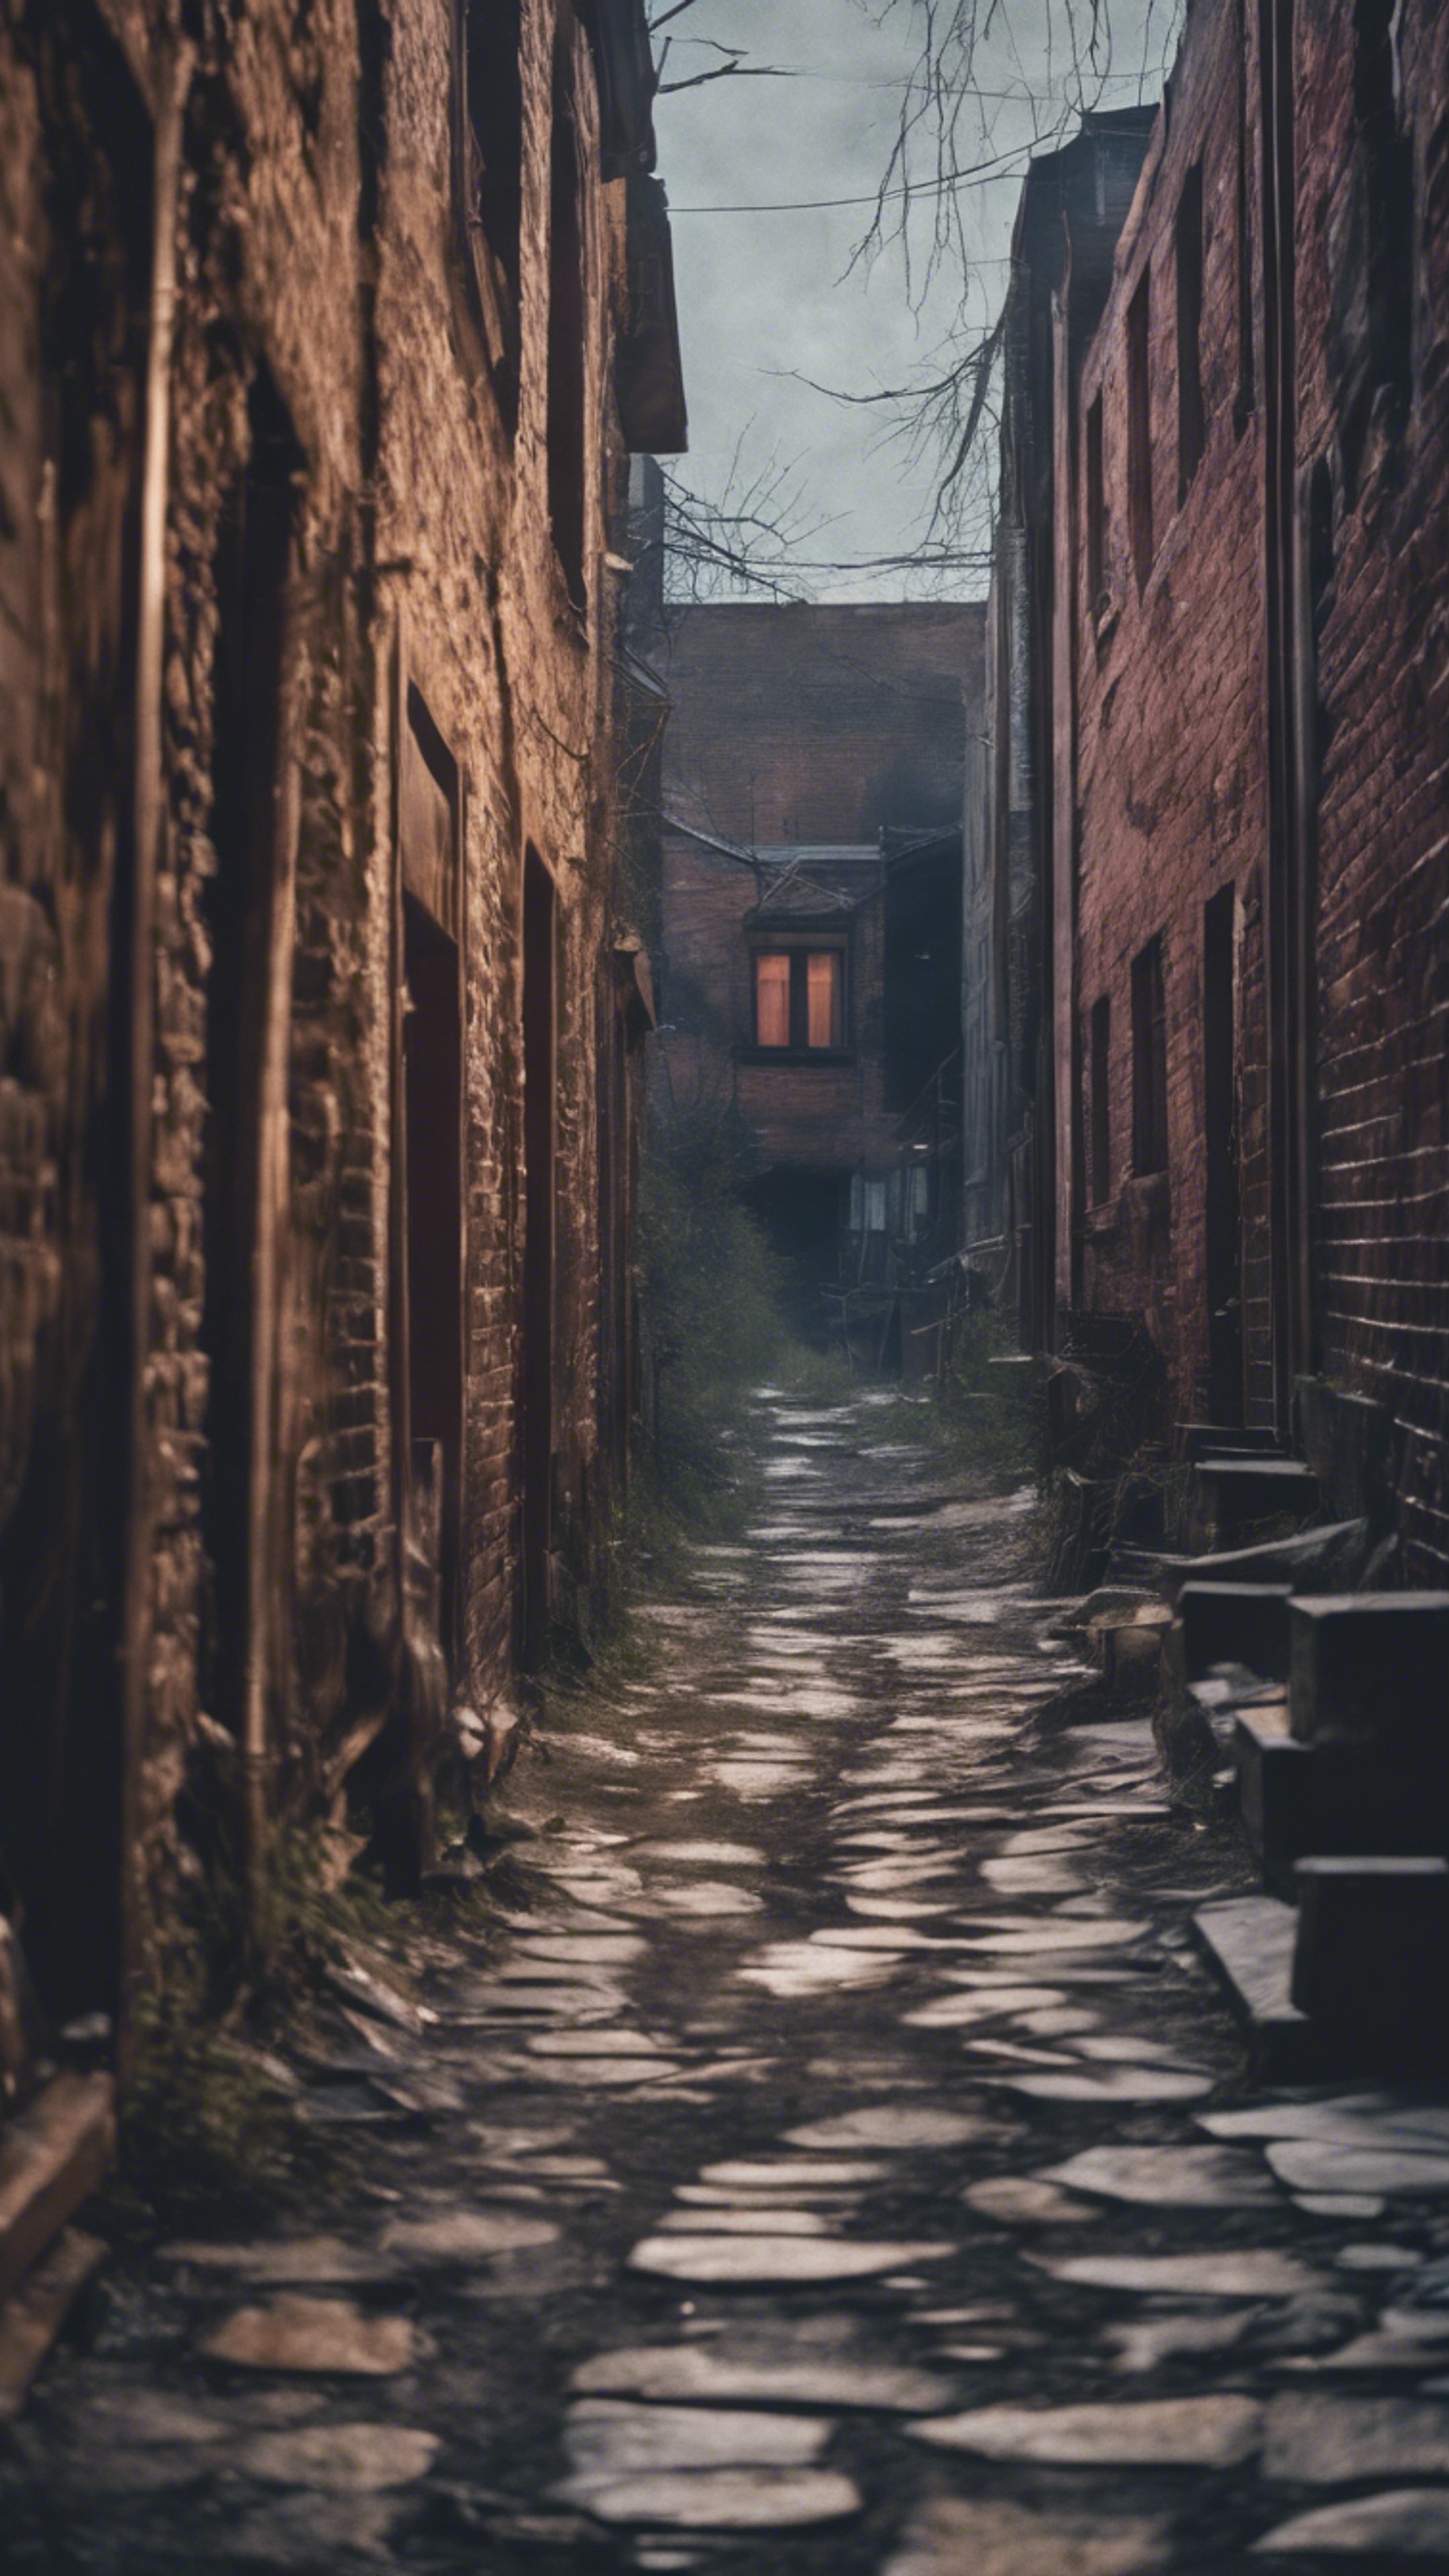 A haunted alleyway in a ghost town with spectral figures floating around. Tapeta[5b53dba013a8448c806a]